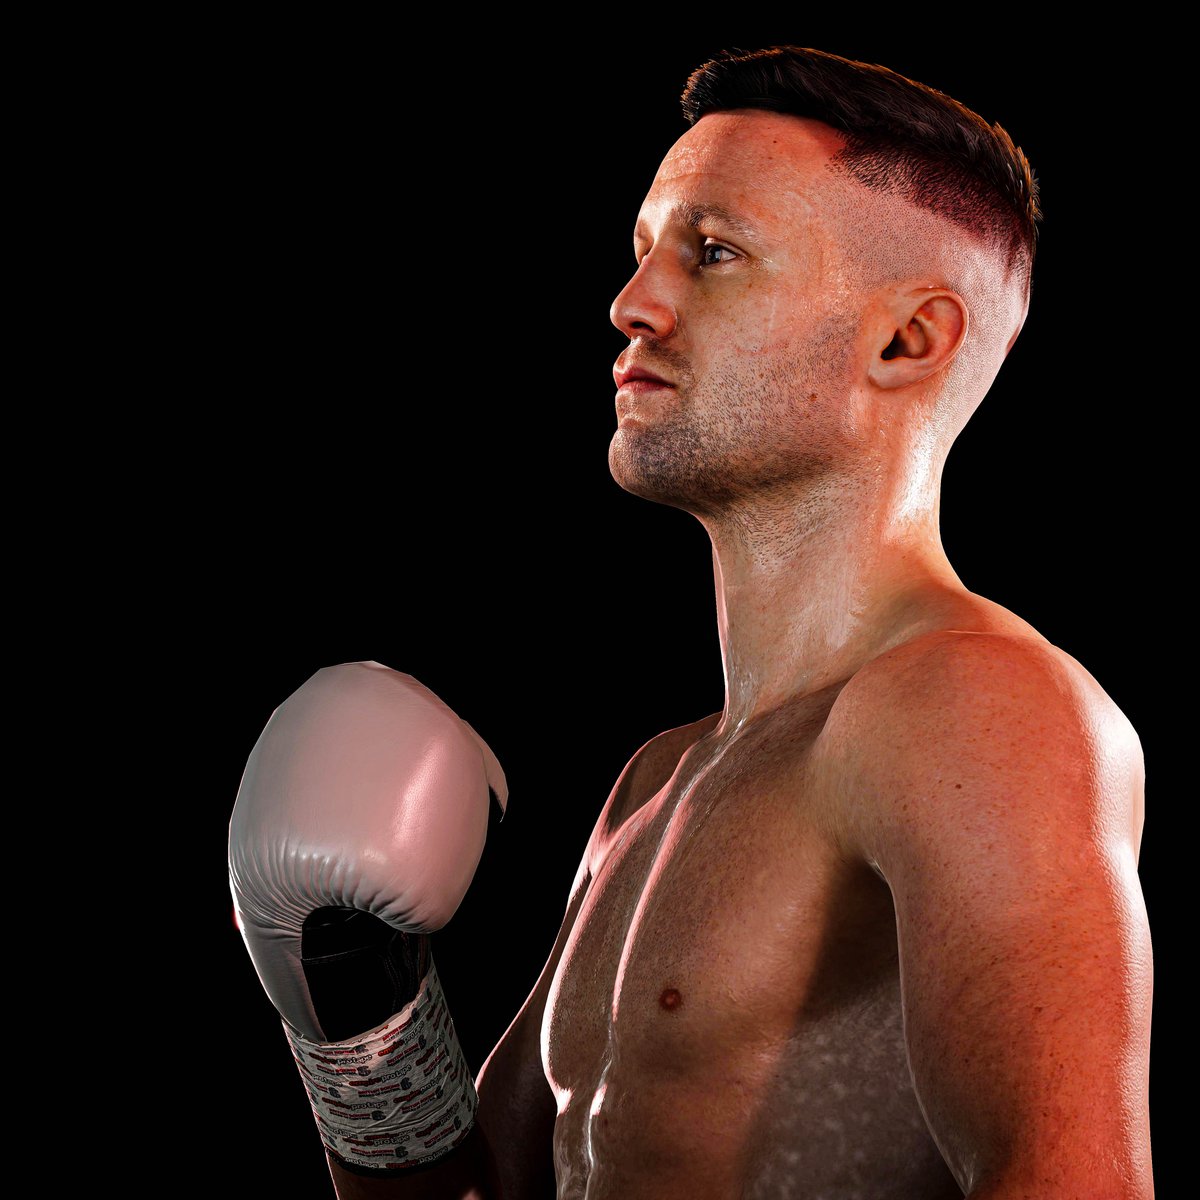 'The Tartan Tornado' @JoshTaylorBoxer, currently ranked as the world's best super-lightweight by @BoxRec, will be available on day 1 of early access in Undisputed! #BecomeUndisputed 🥊